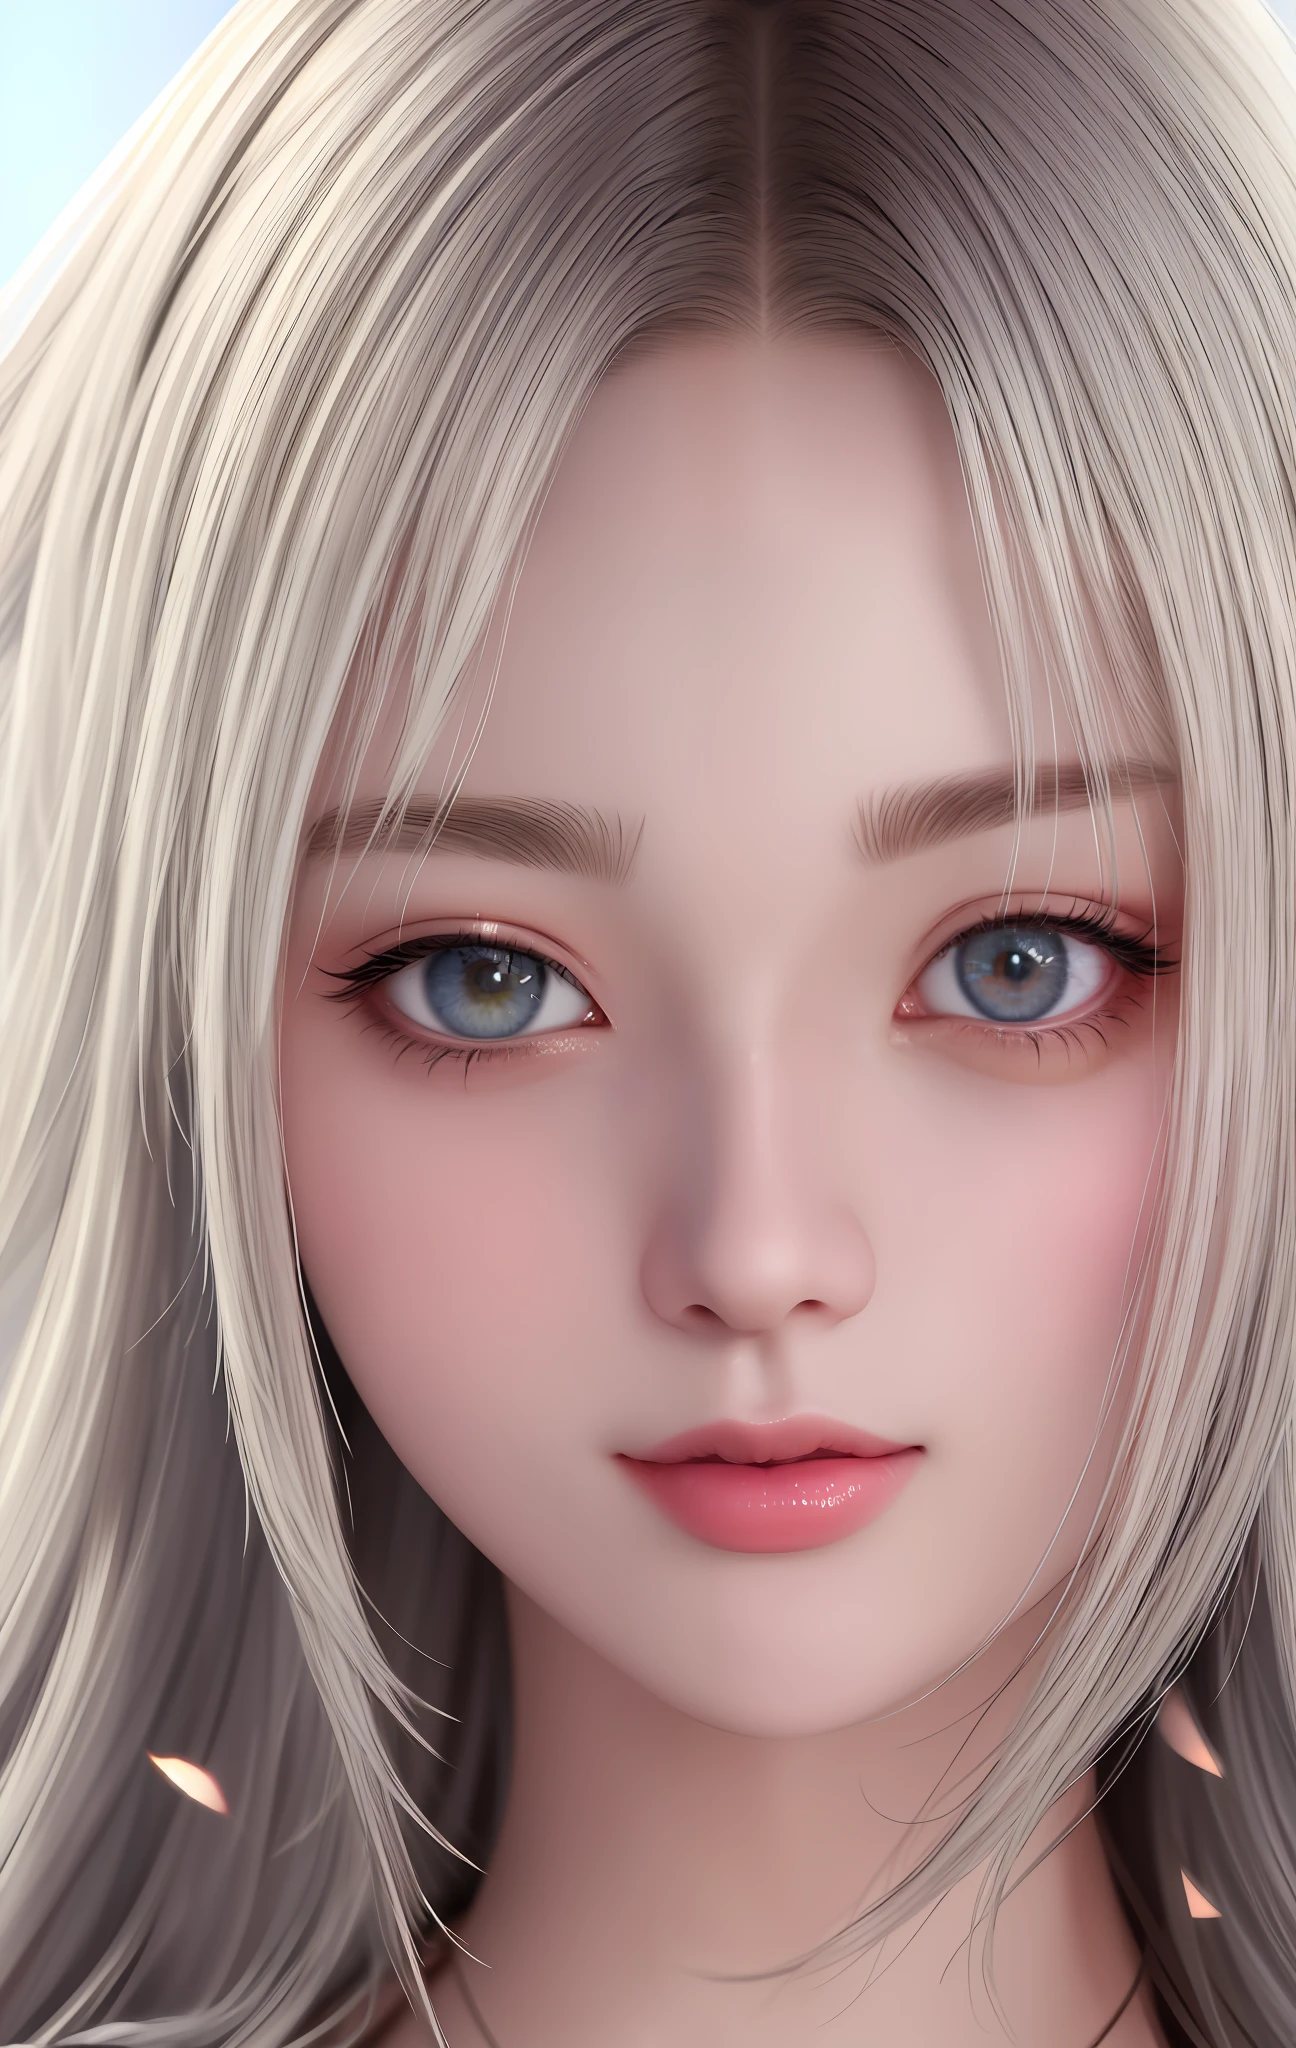 ulzzang -6500-v1.1, and souls、anime styled、ssmile、portraitures、Beautiful and moisturized silver-white eyes like crystal clear glass、Beautiful blonde hair without hair ornaments, extremely detailed eye and face, Beautiful detailed eyes,  huge filesize, Ultra-detail, hight resolution, ighly detailed, top-quality, ​masterpiece,  illustratio, ighly detailed, nffsw, unification, 8k wallpaper, splendid, finely detail, ​masterpiece, top-quality, Highly detailed ticker uniform 8K wallpaper, Light on the Face、light、２０Year old girl